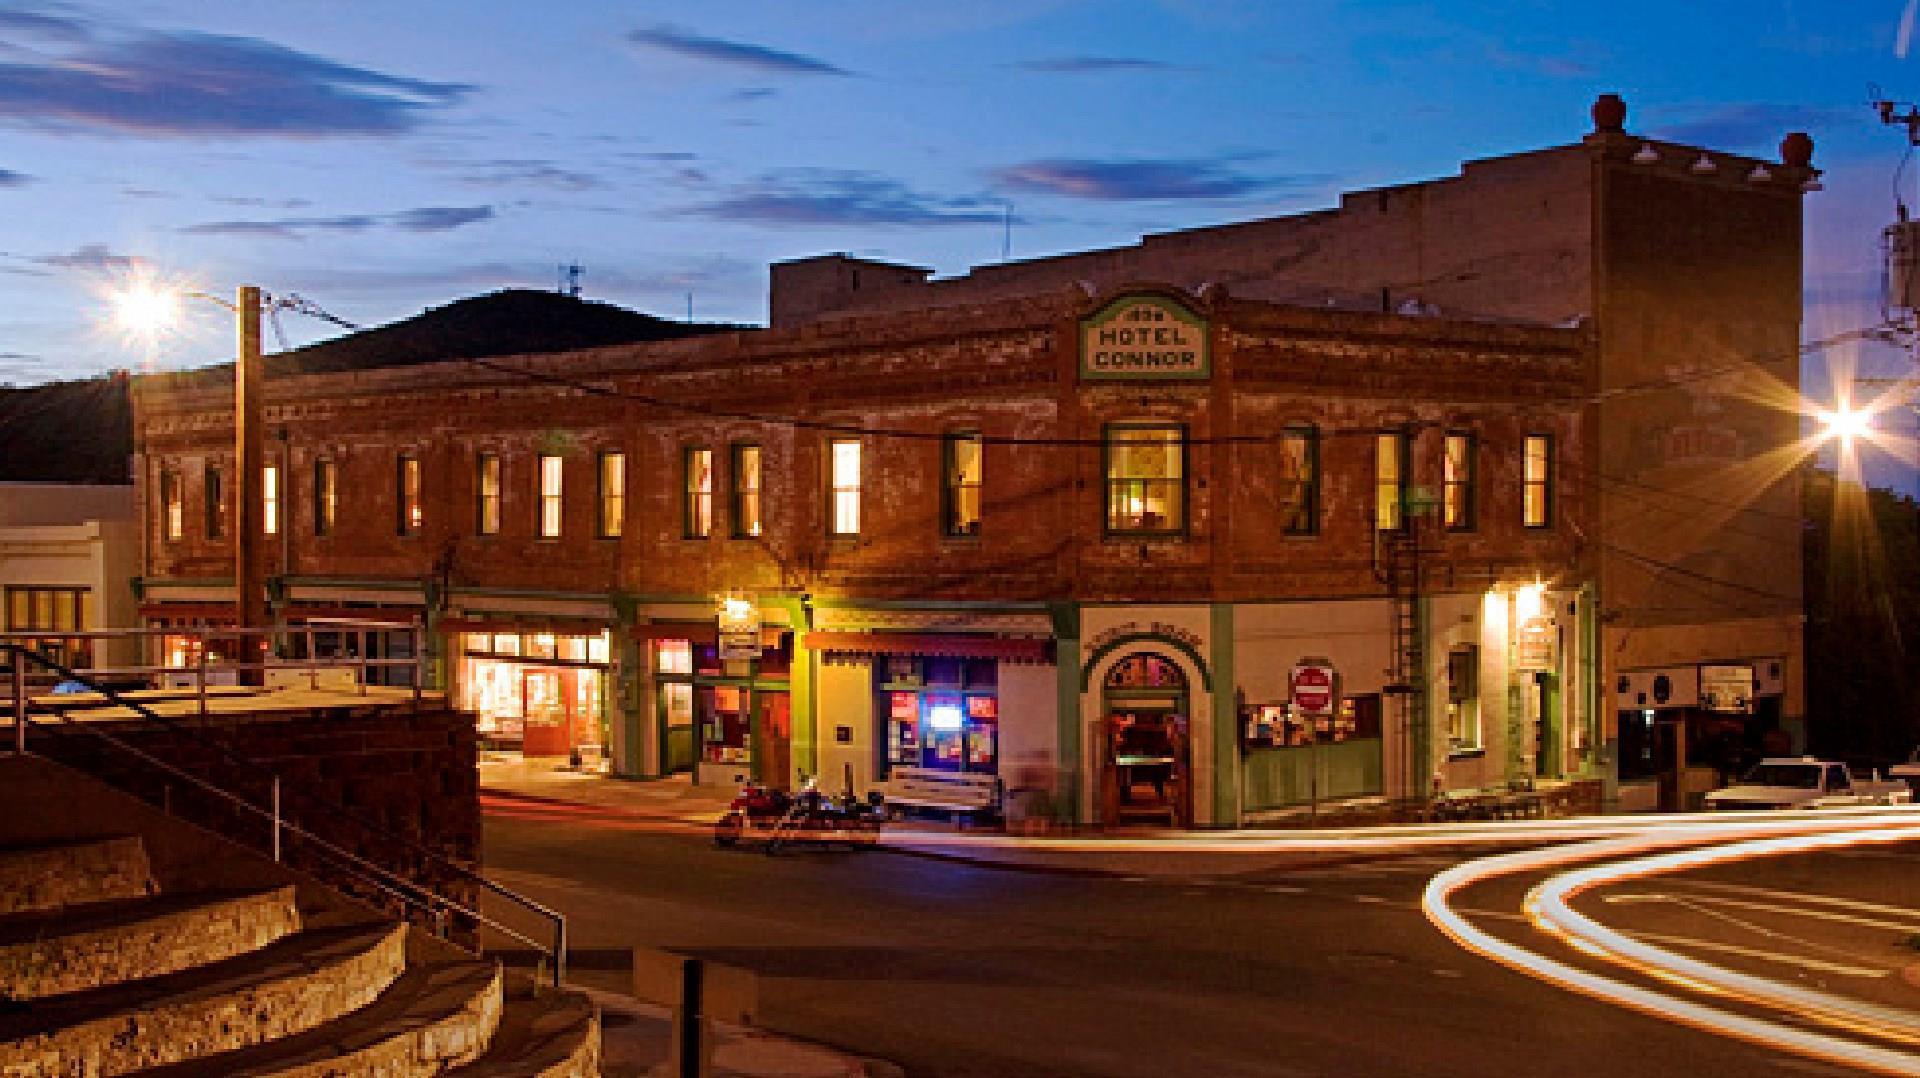 The Connor Hotel in Jerome, AZ